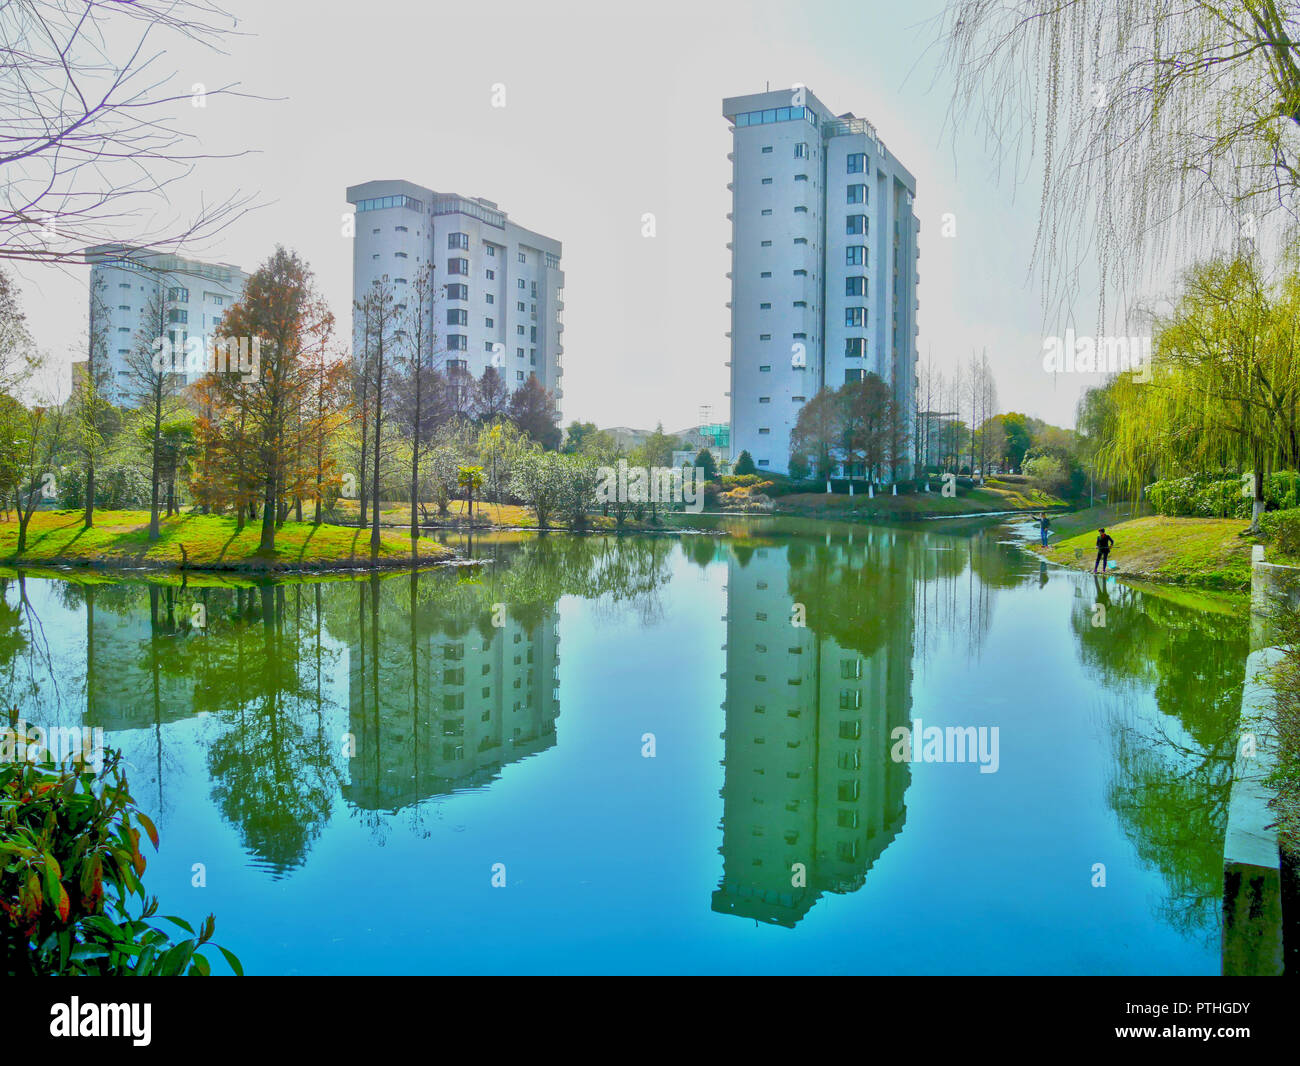 Apartments beside lake, Anting New Town Stock Photo